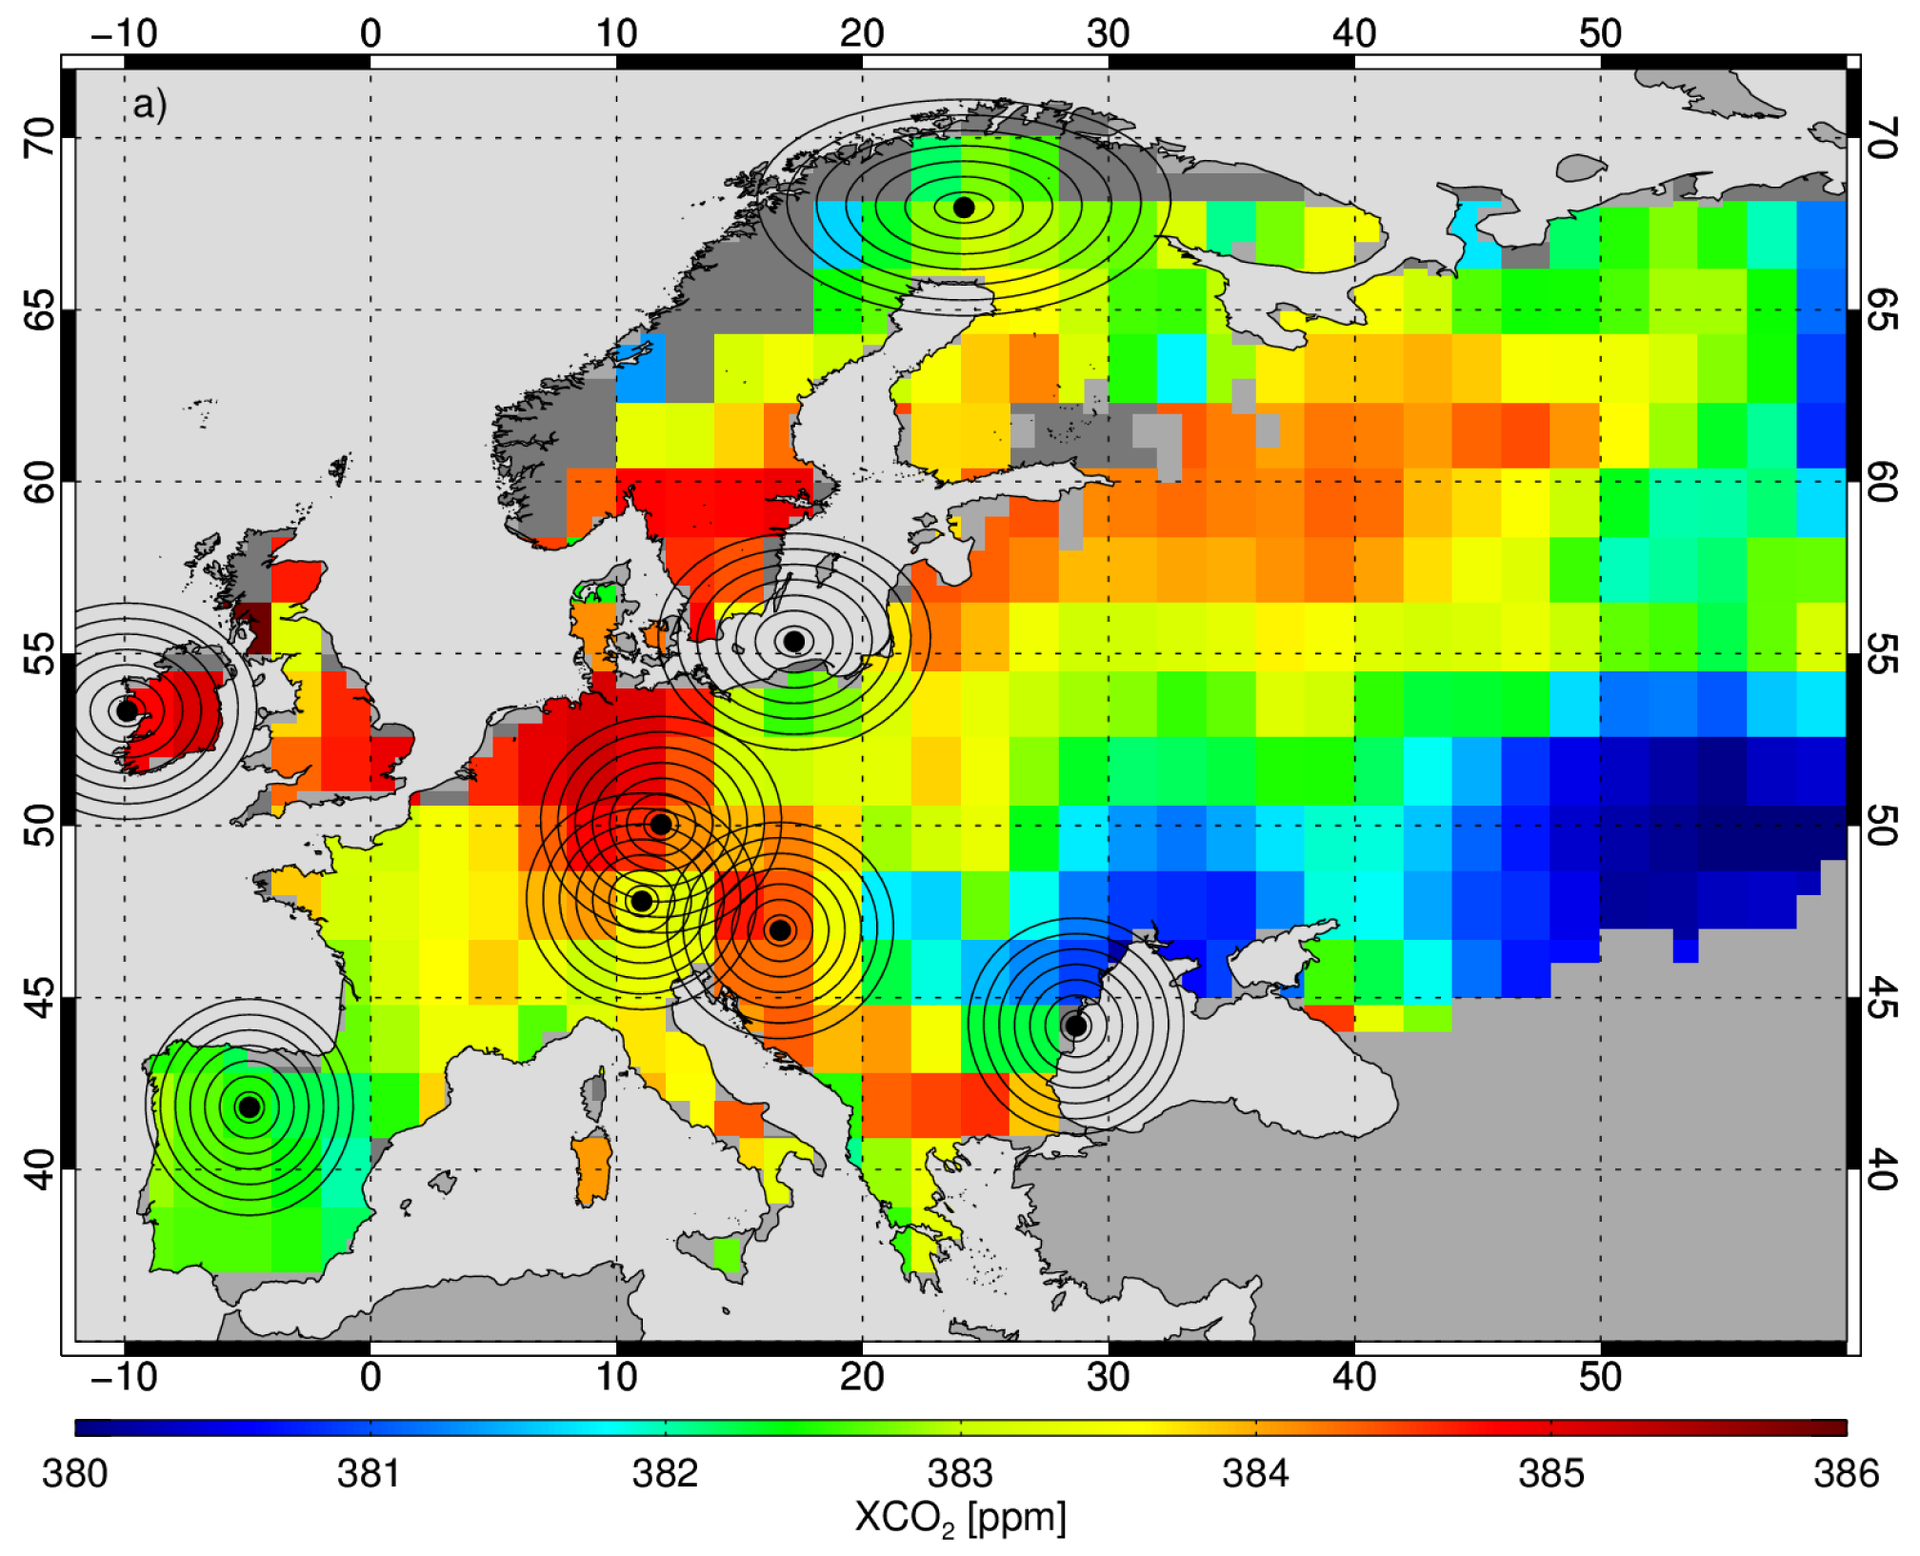 Average satellite carbon dioxide concentrations over Europe 